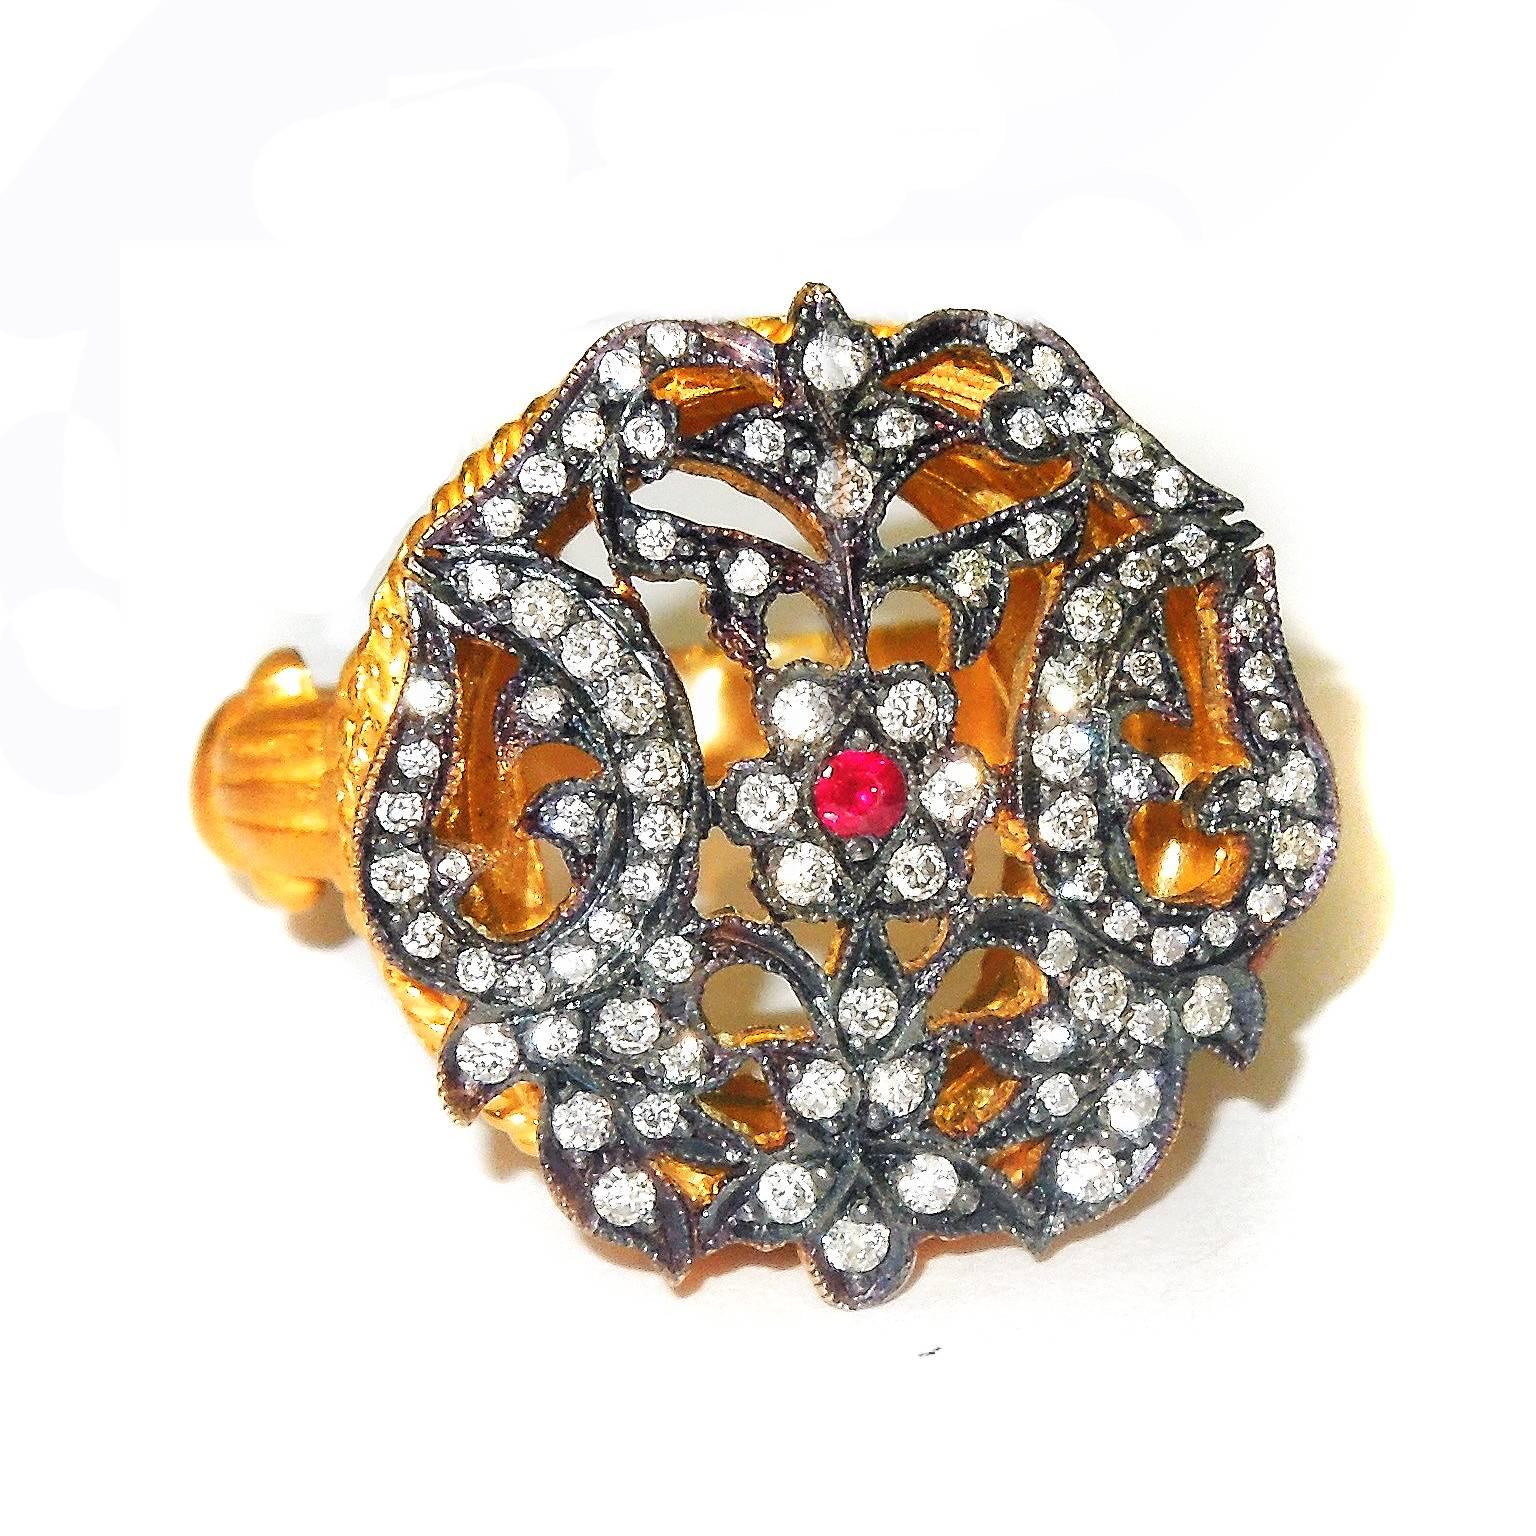 14K Yellow Gold Ring with Diamonds

0.43ct. H Color, VS Clarity Diamonds 
Center has one Ruby

Stones are set on blackened silver. Rest of ring is done in 14k gold

Face dimensions: 0.80 inch W x 0.80 inch L

11.1 grams 14k gold

Currently size 7.5.